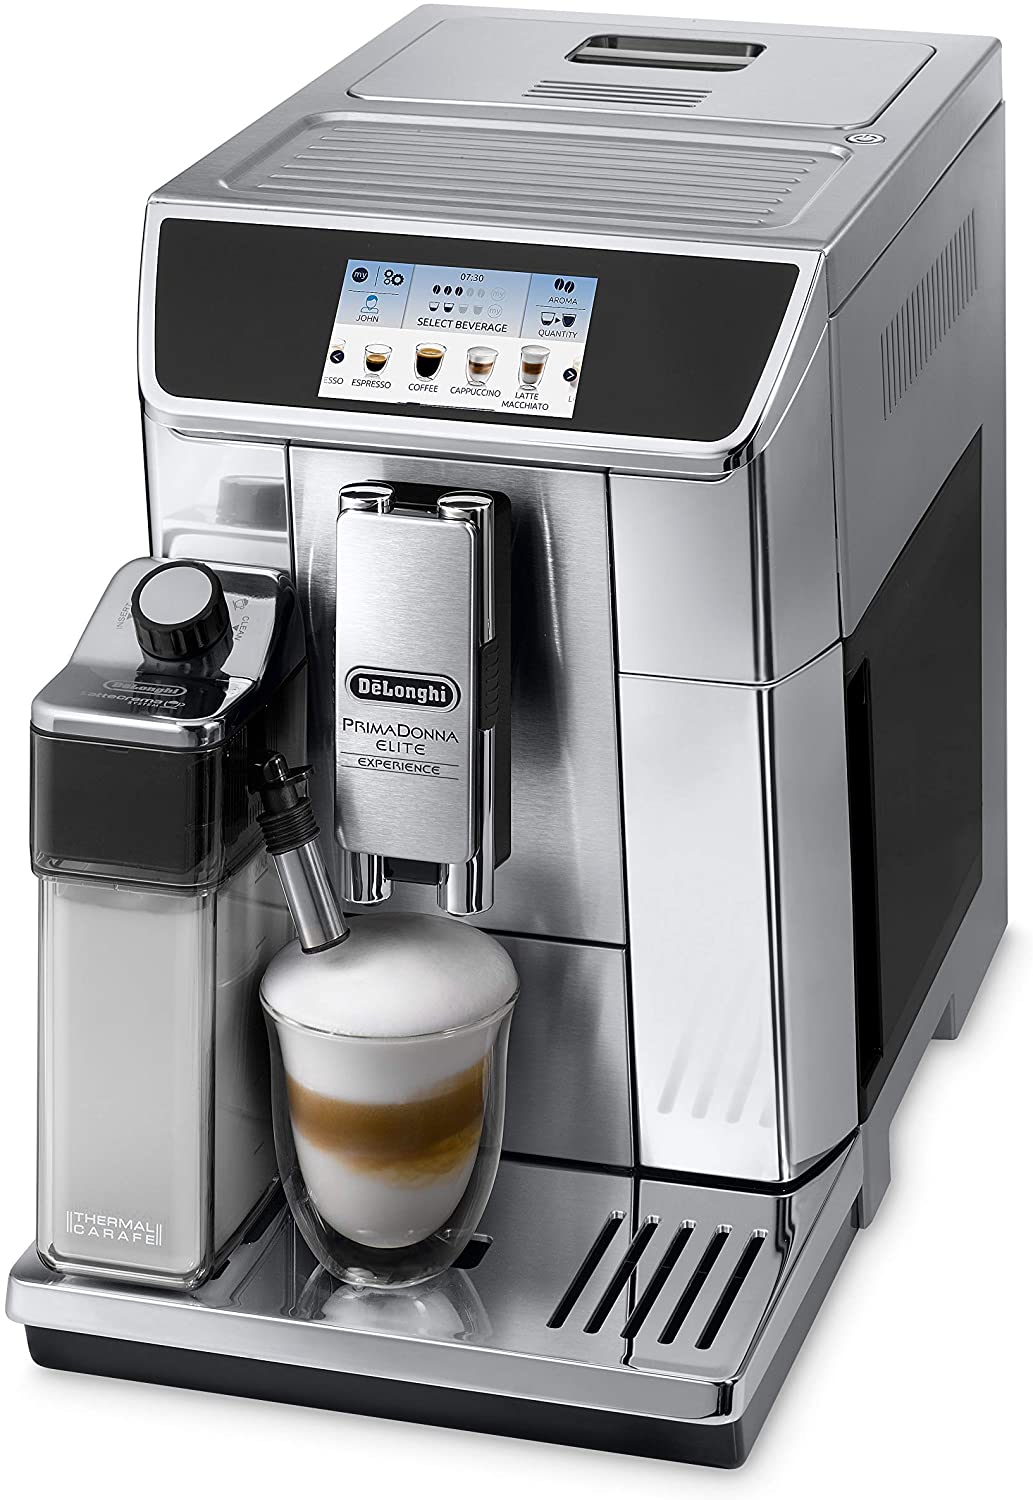 DeLonghi PrimaDonna Elite Fully Automatic Coffee Machine with Milk System,